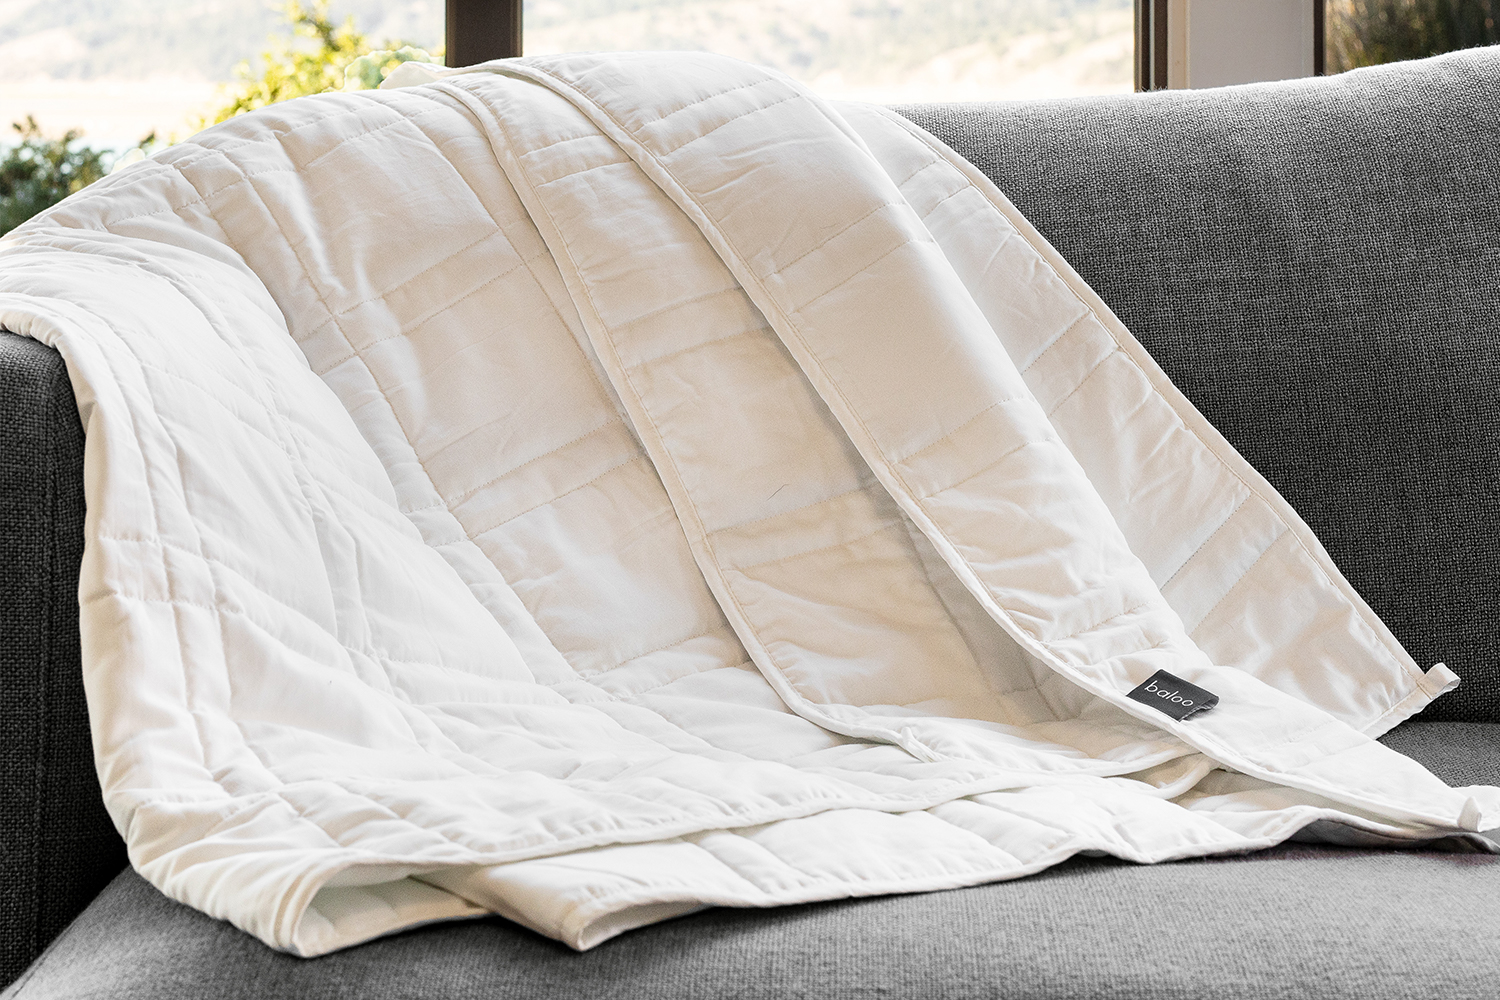 Always Wanted to Try a Weighted Blanket? Baloo Is on Sale. - InsideHook